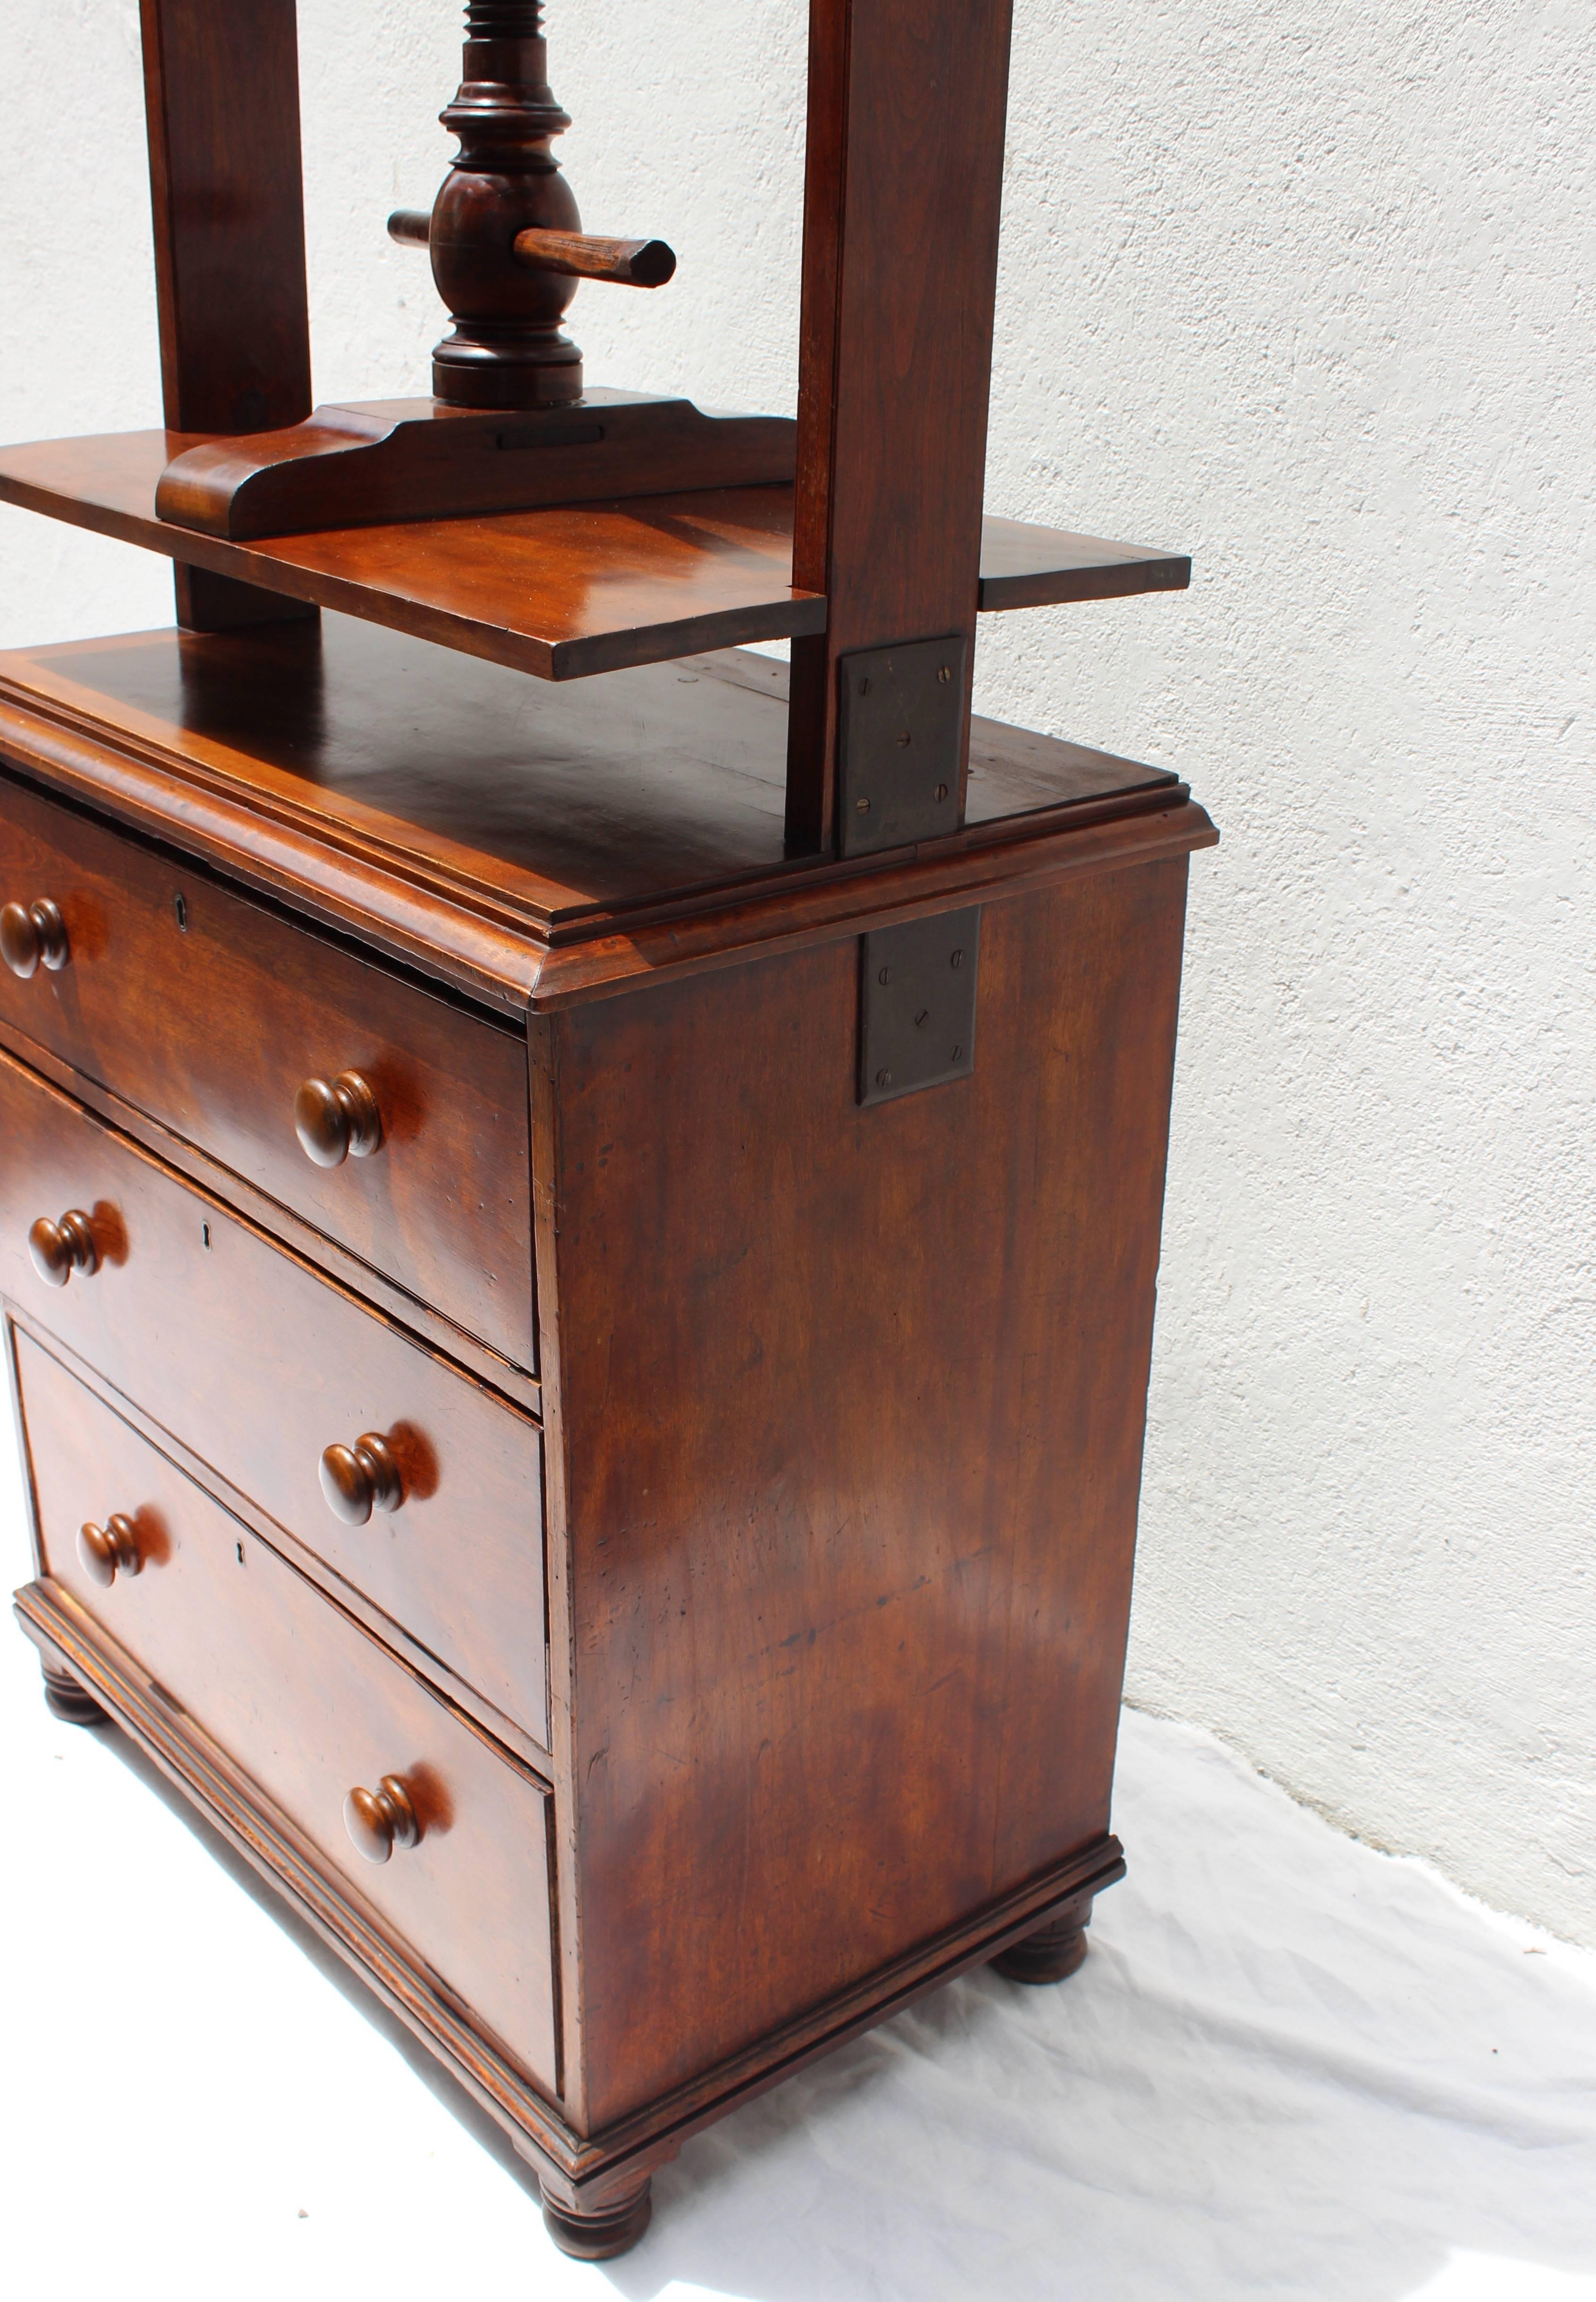 19th century mahogany chest of drawers with book press.